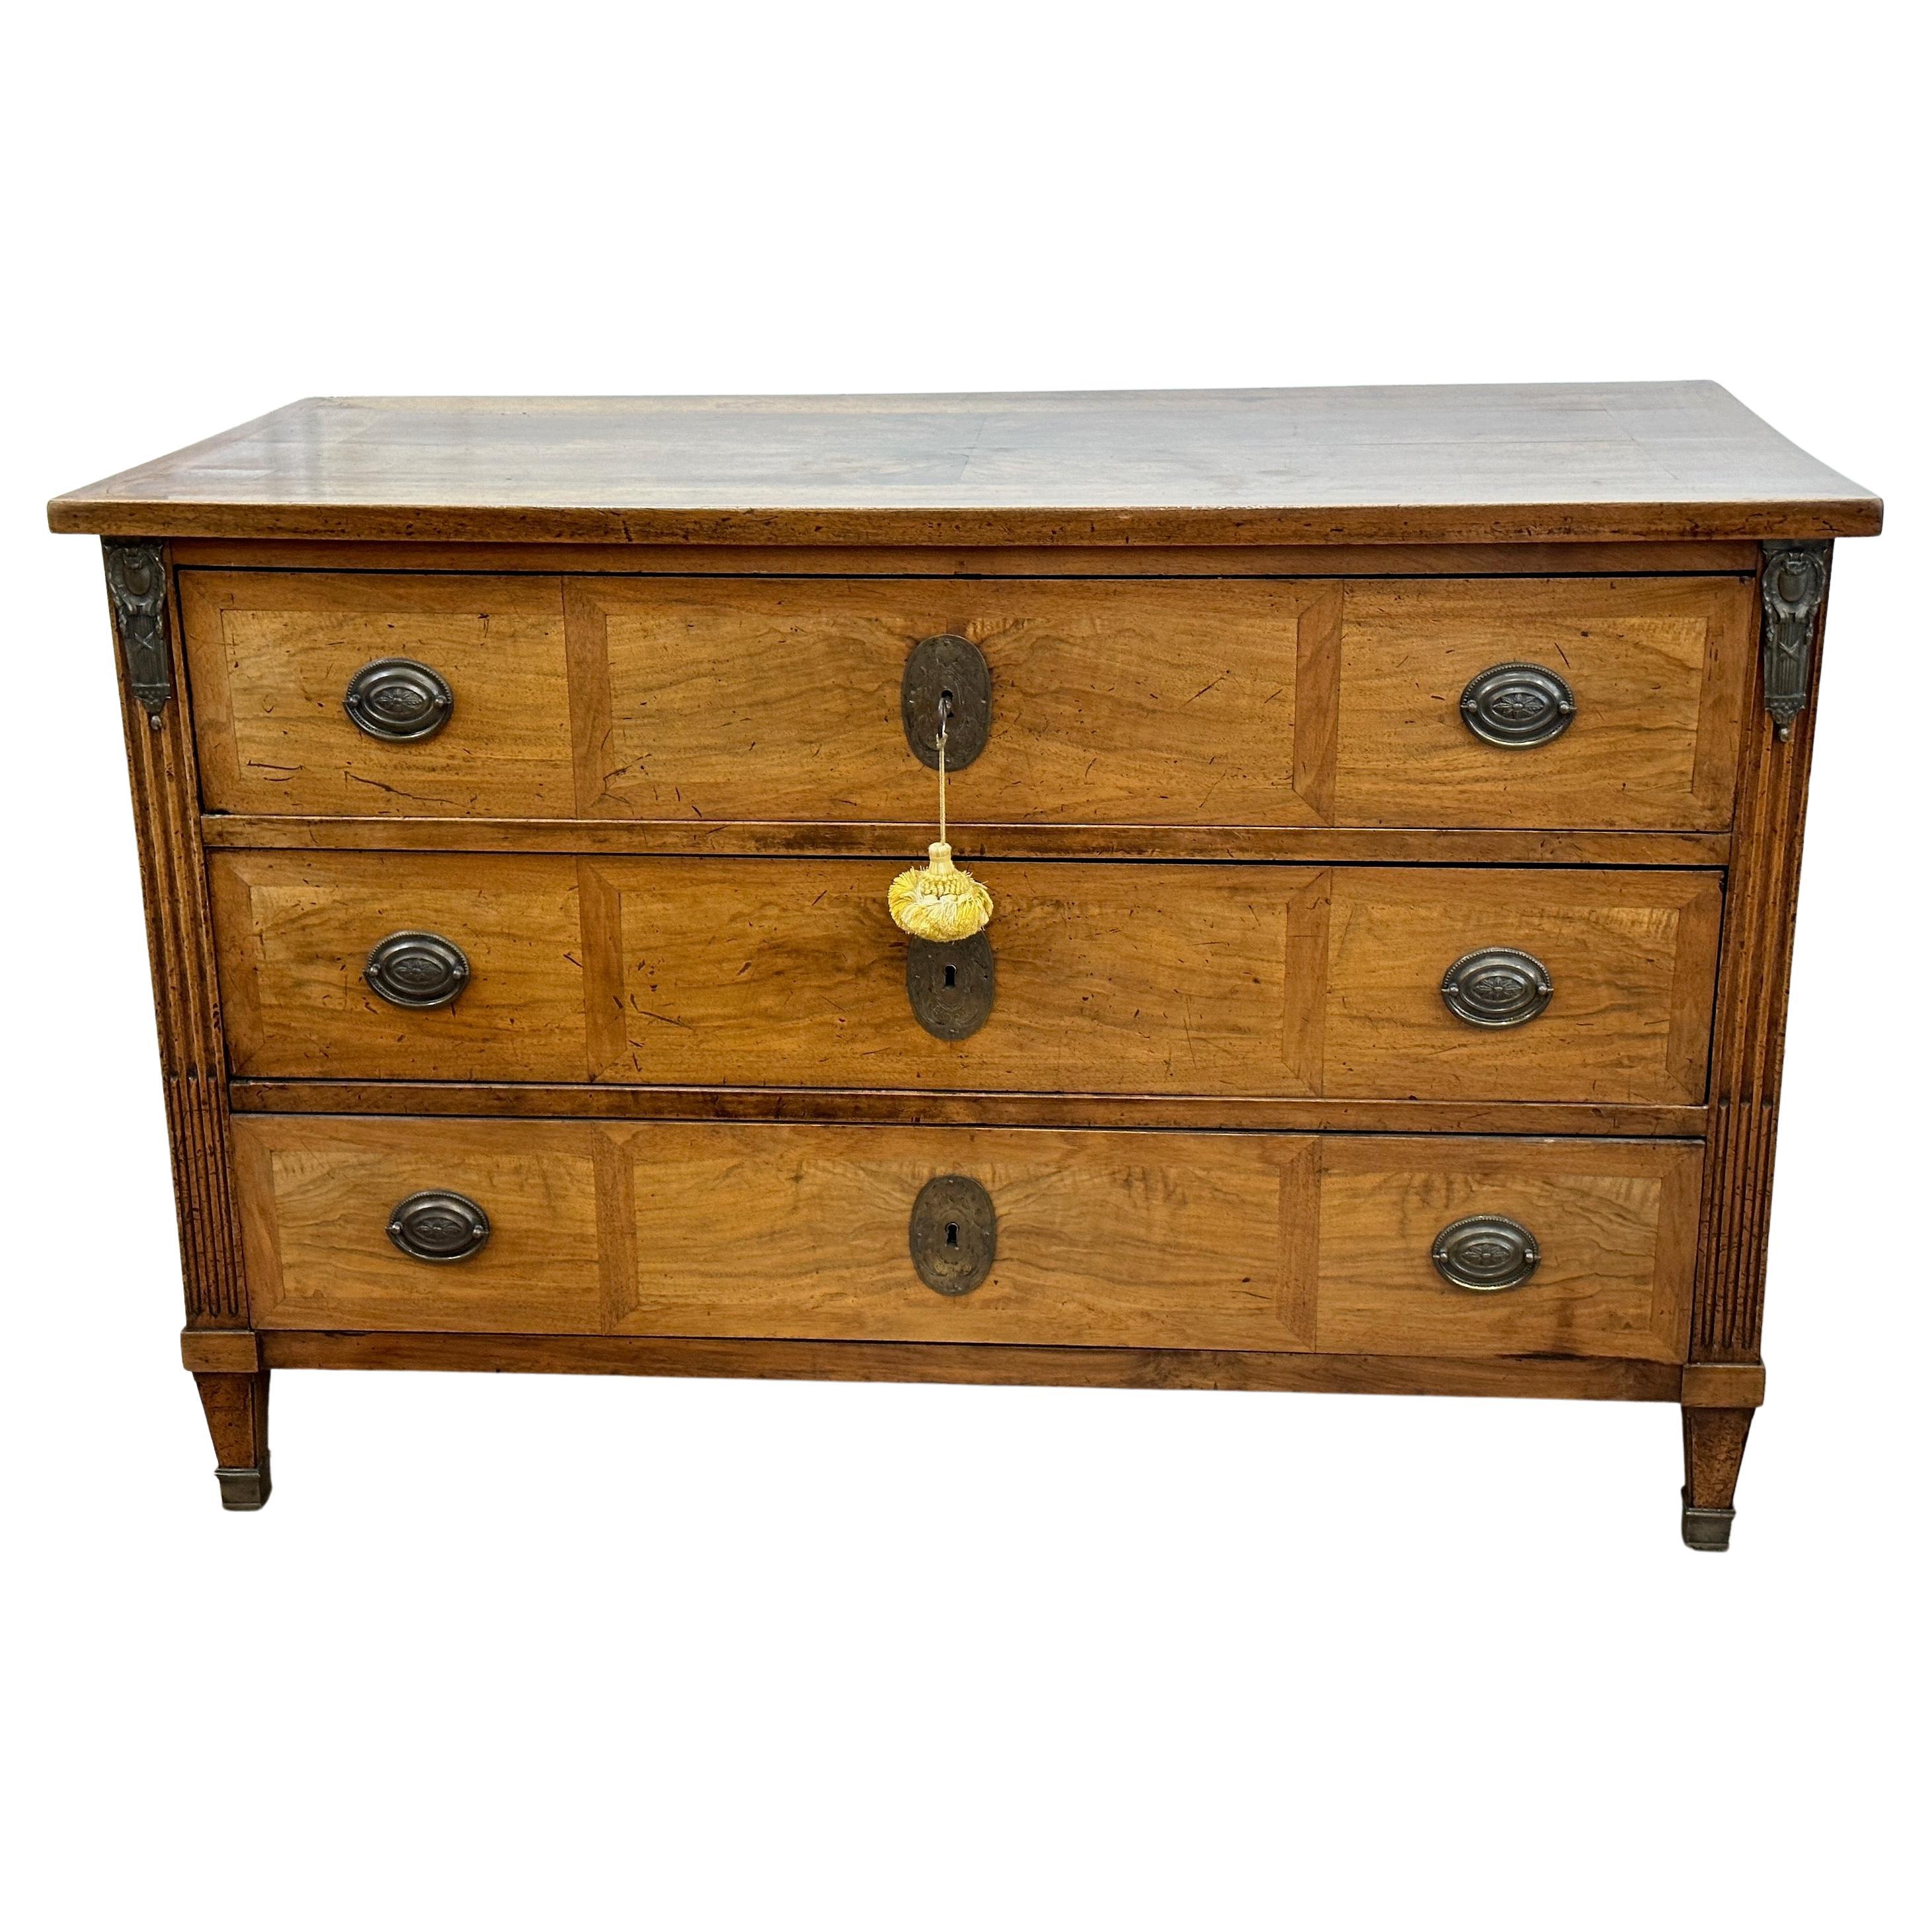 French Neoclassical Fruitwood Commode